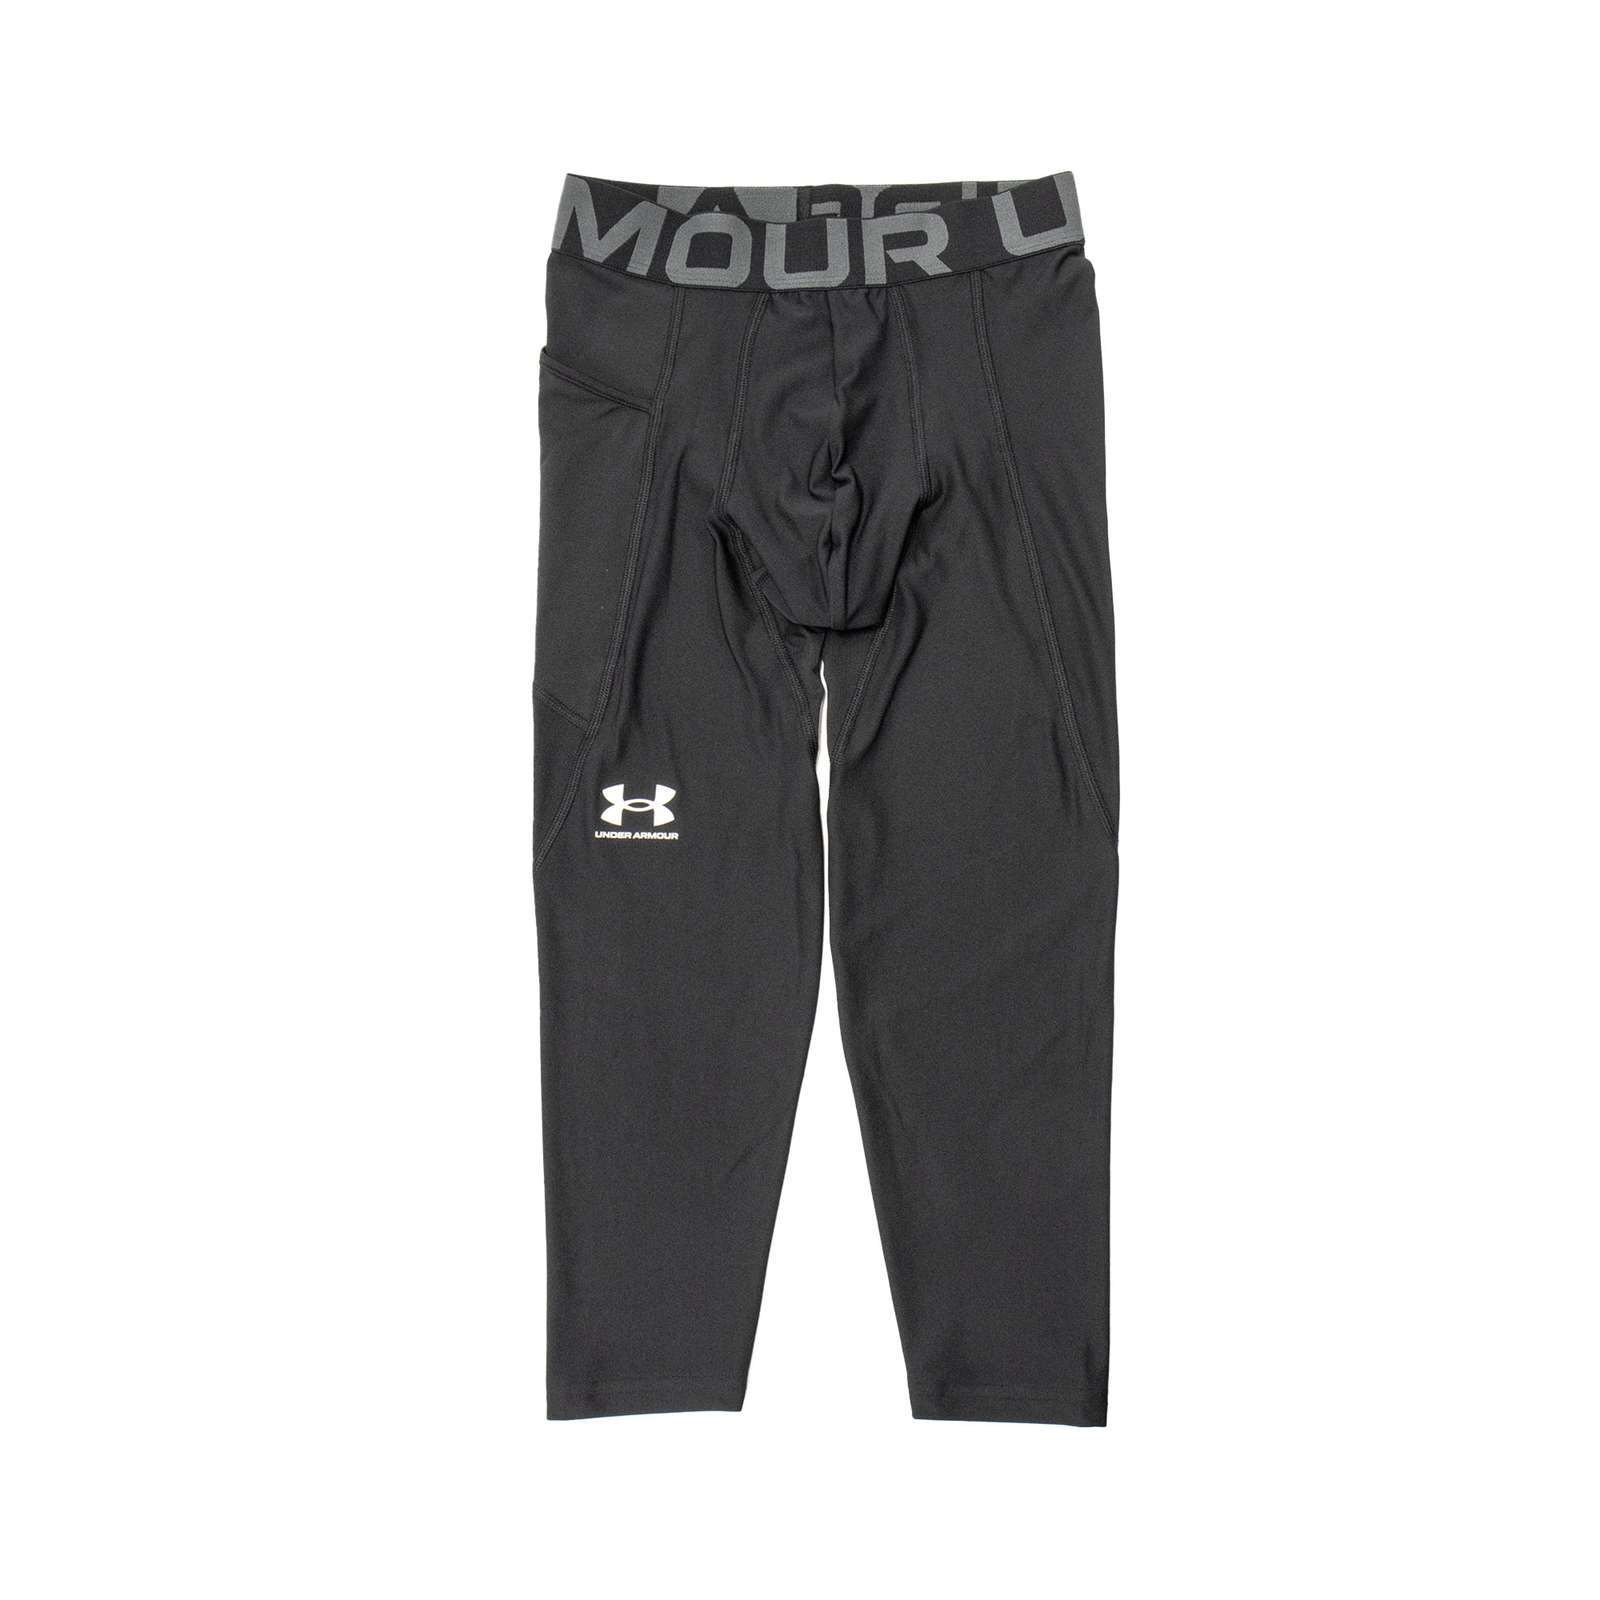 Armor 3-inch compression short, Under Armour